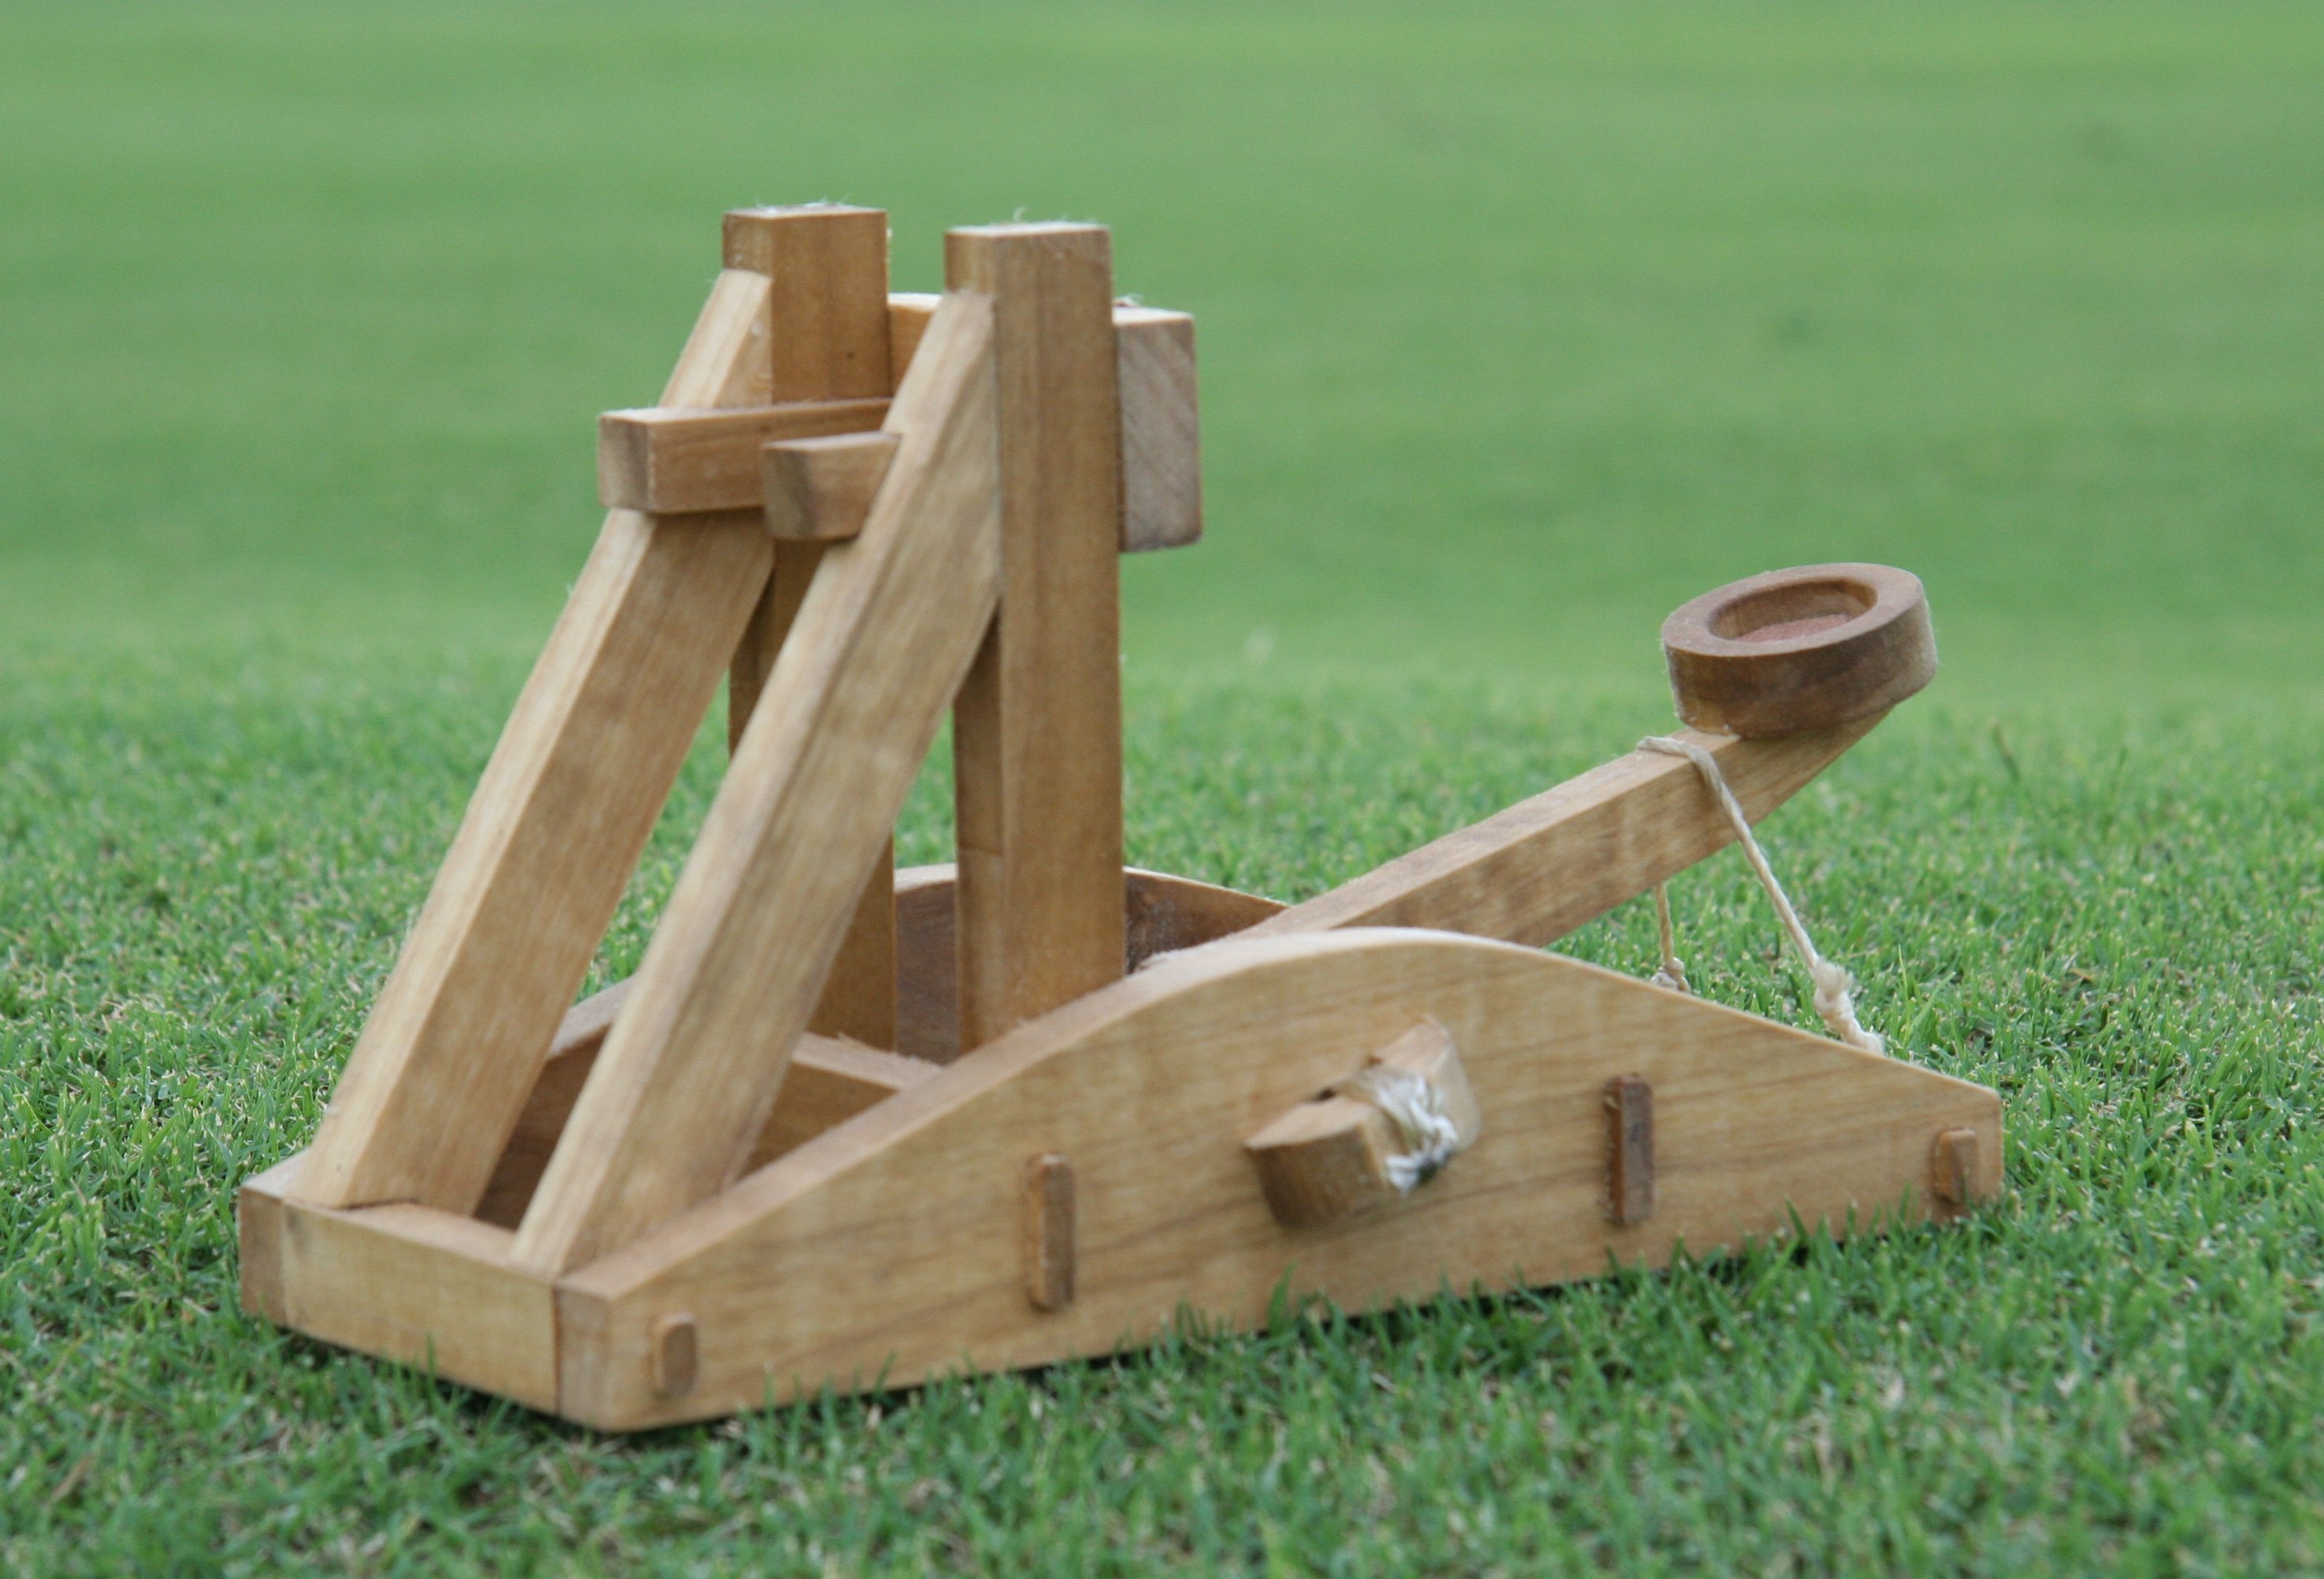 Onager catapult history